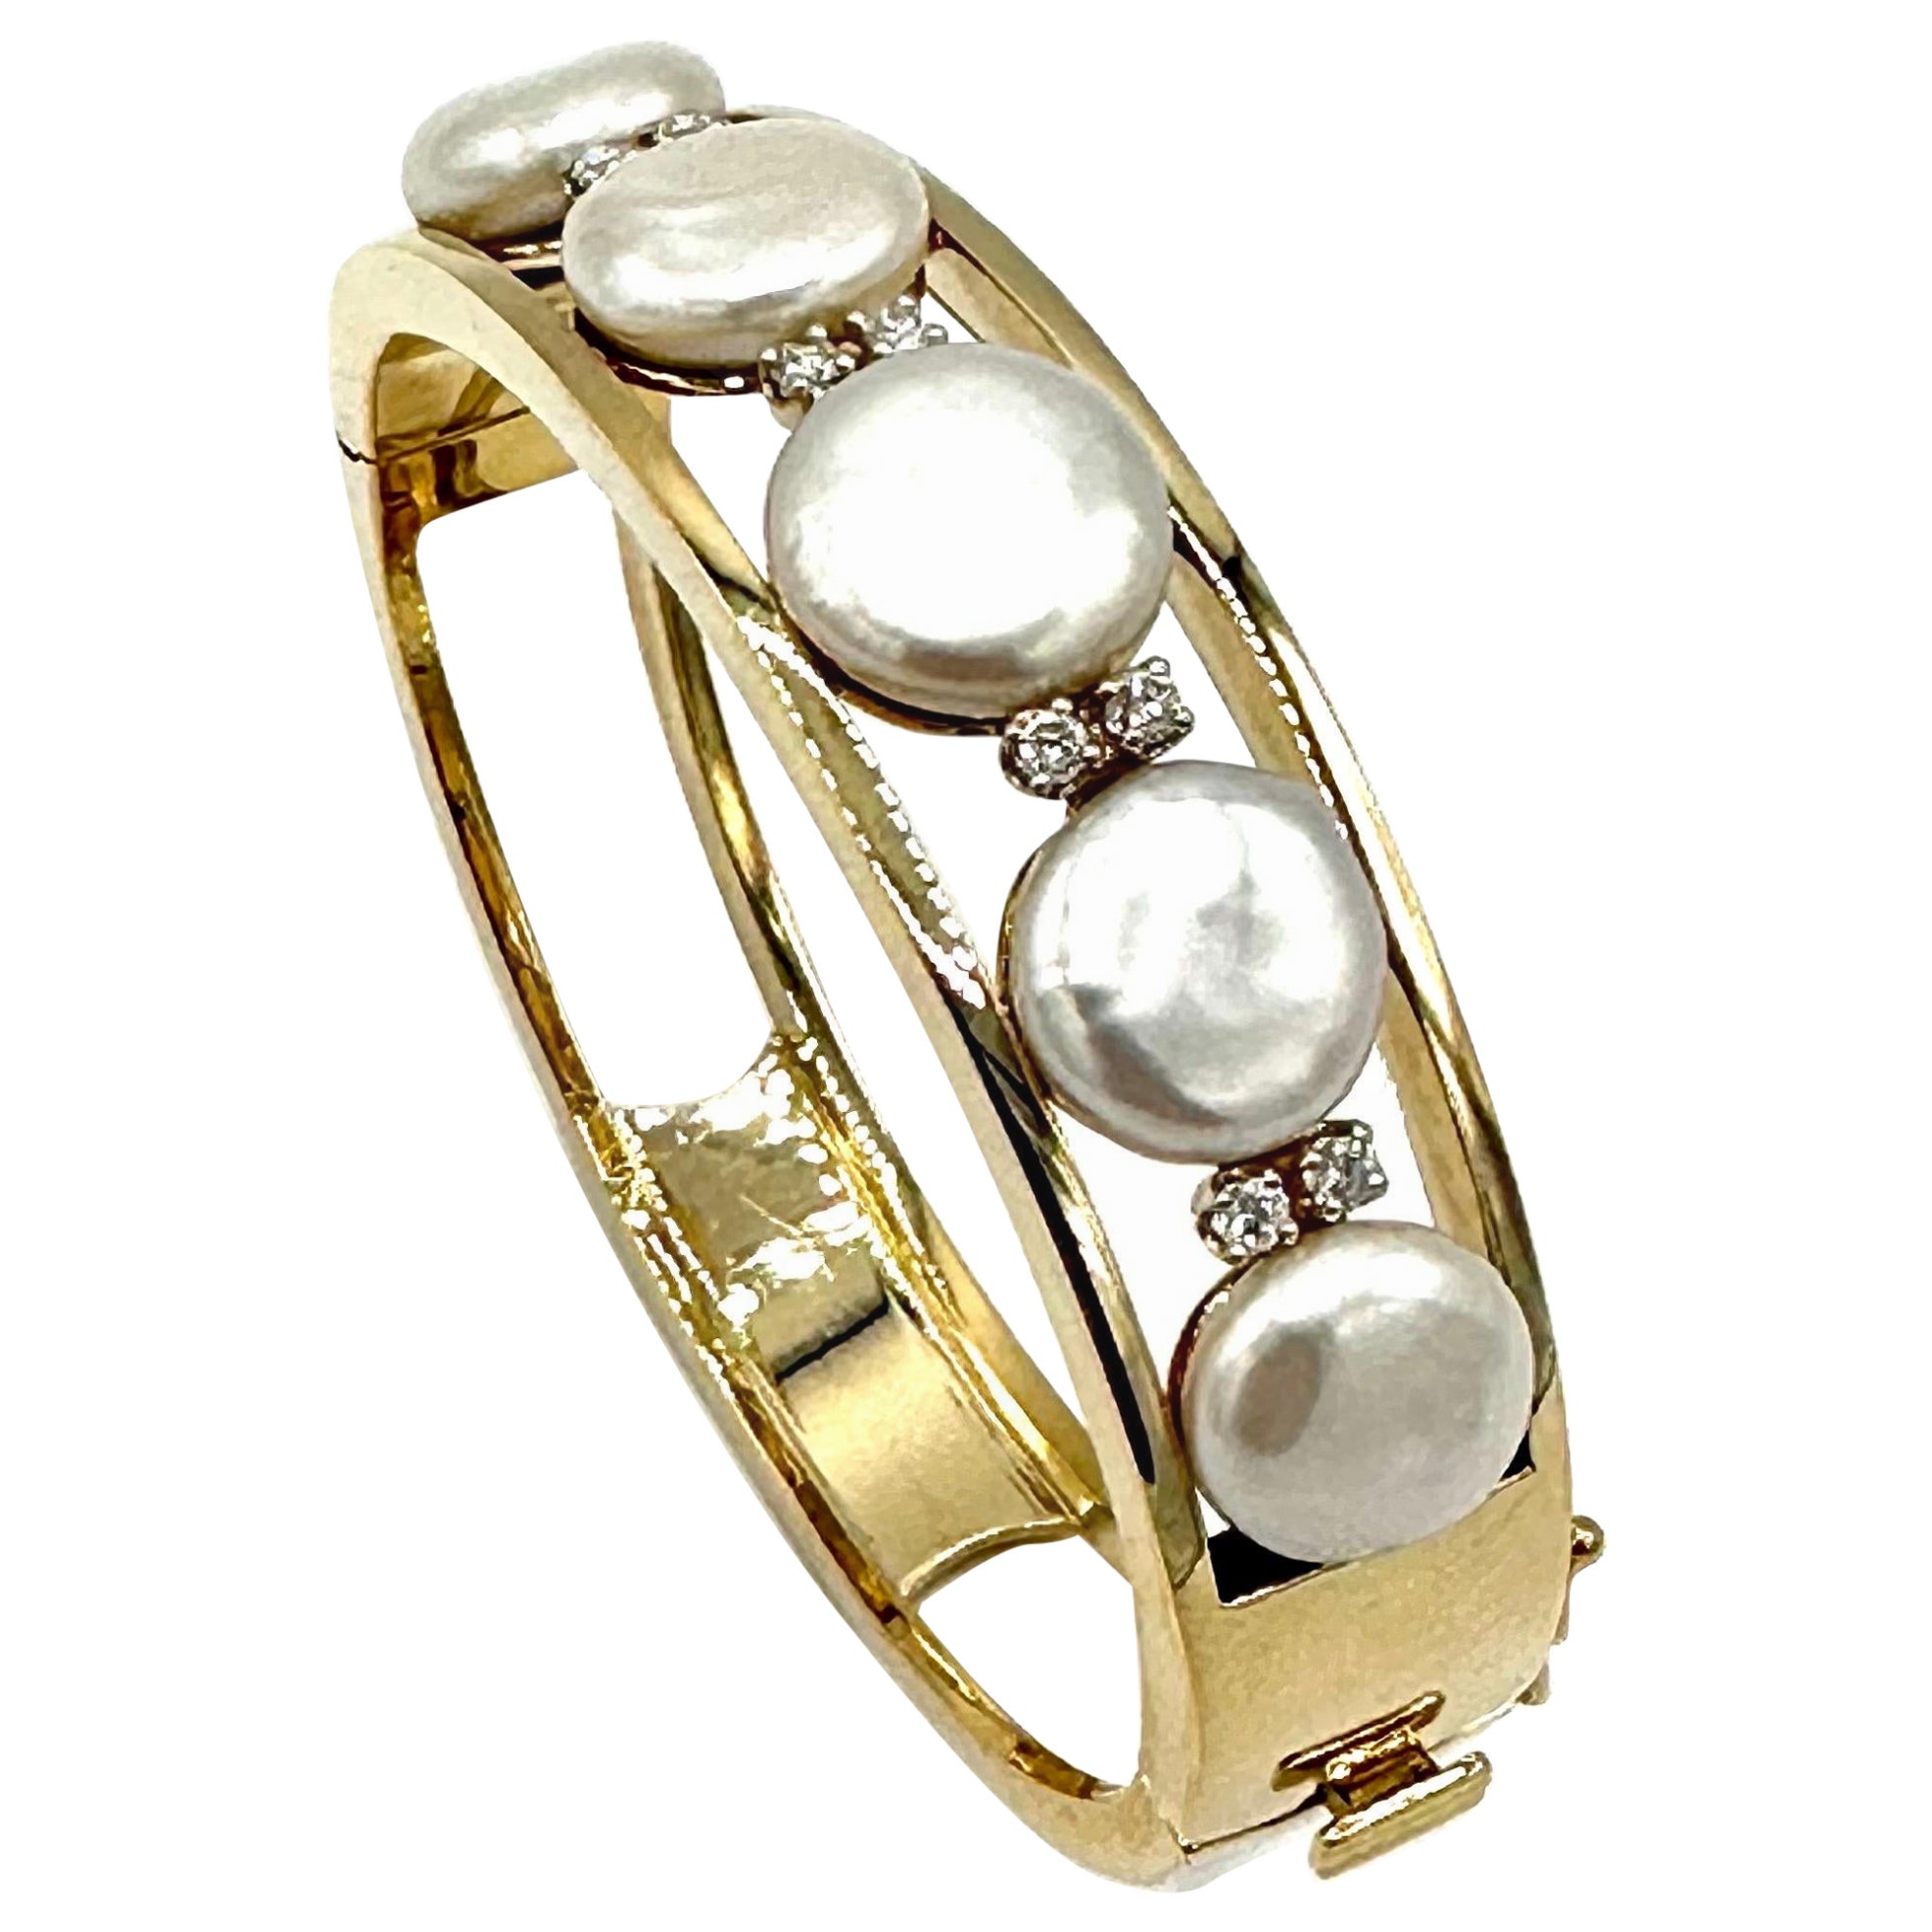 Gumps Round Brilliant Diamond and Coin Pearl 18k Yellow Gold Bangle Bracelet